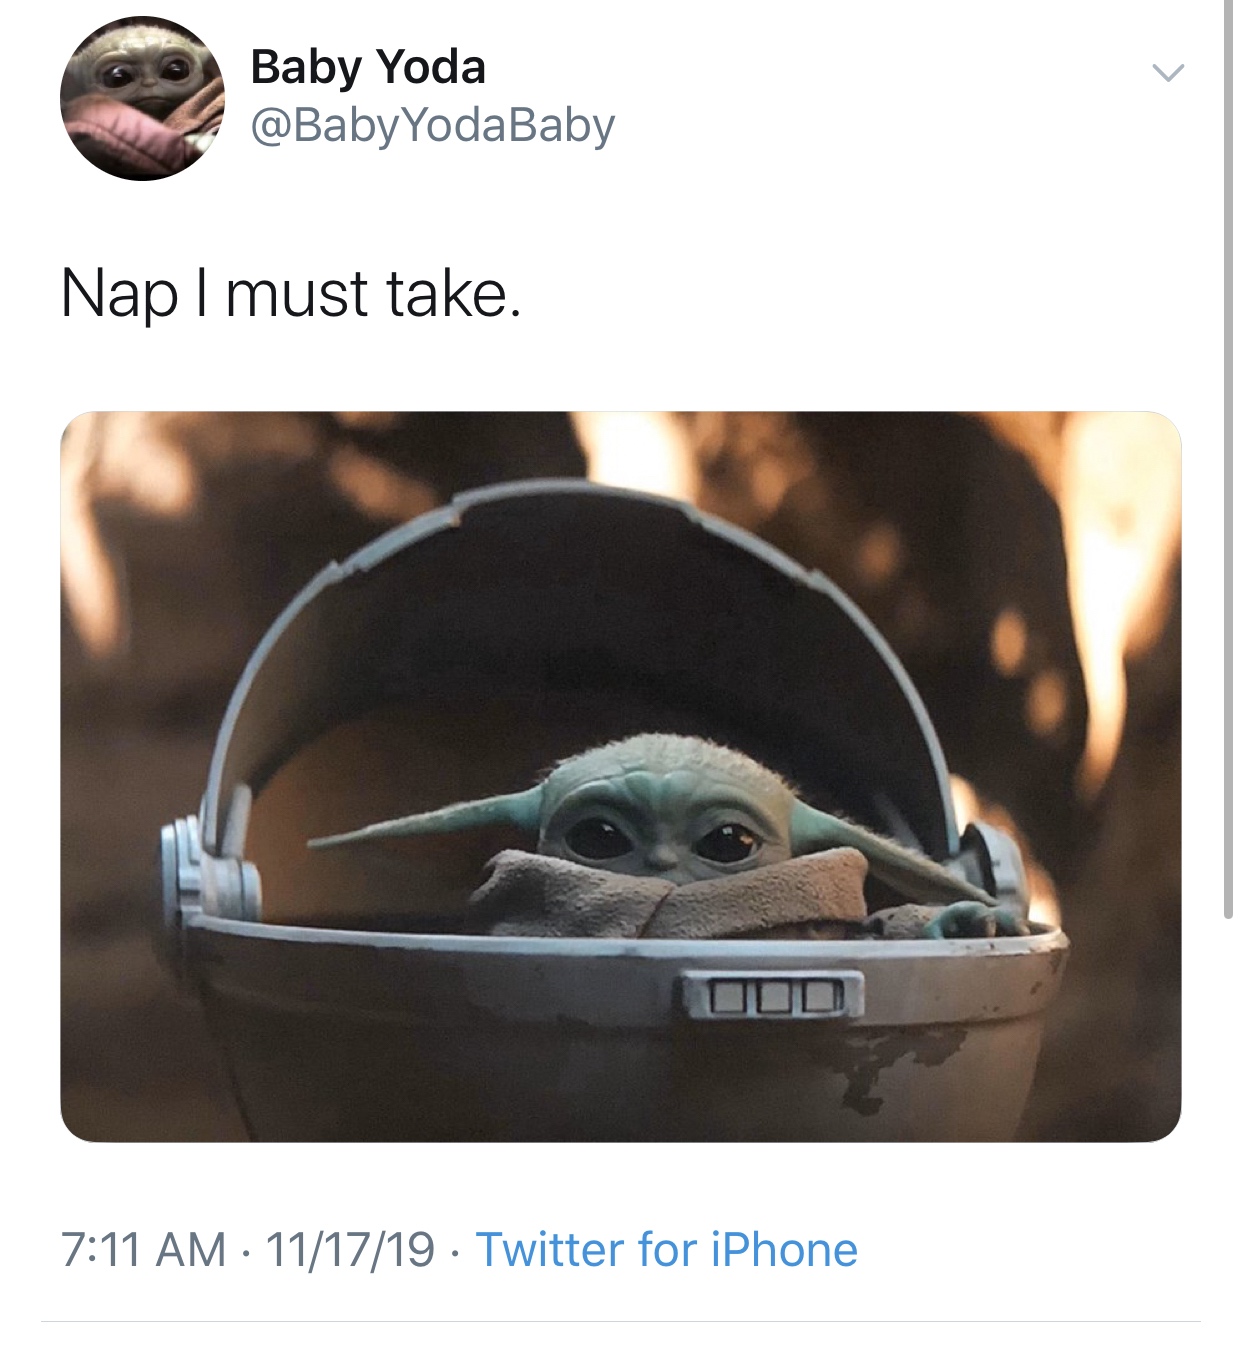 goggles - Baby Yoda NapI must take. 111719 Twitter for iPhone